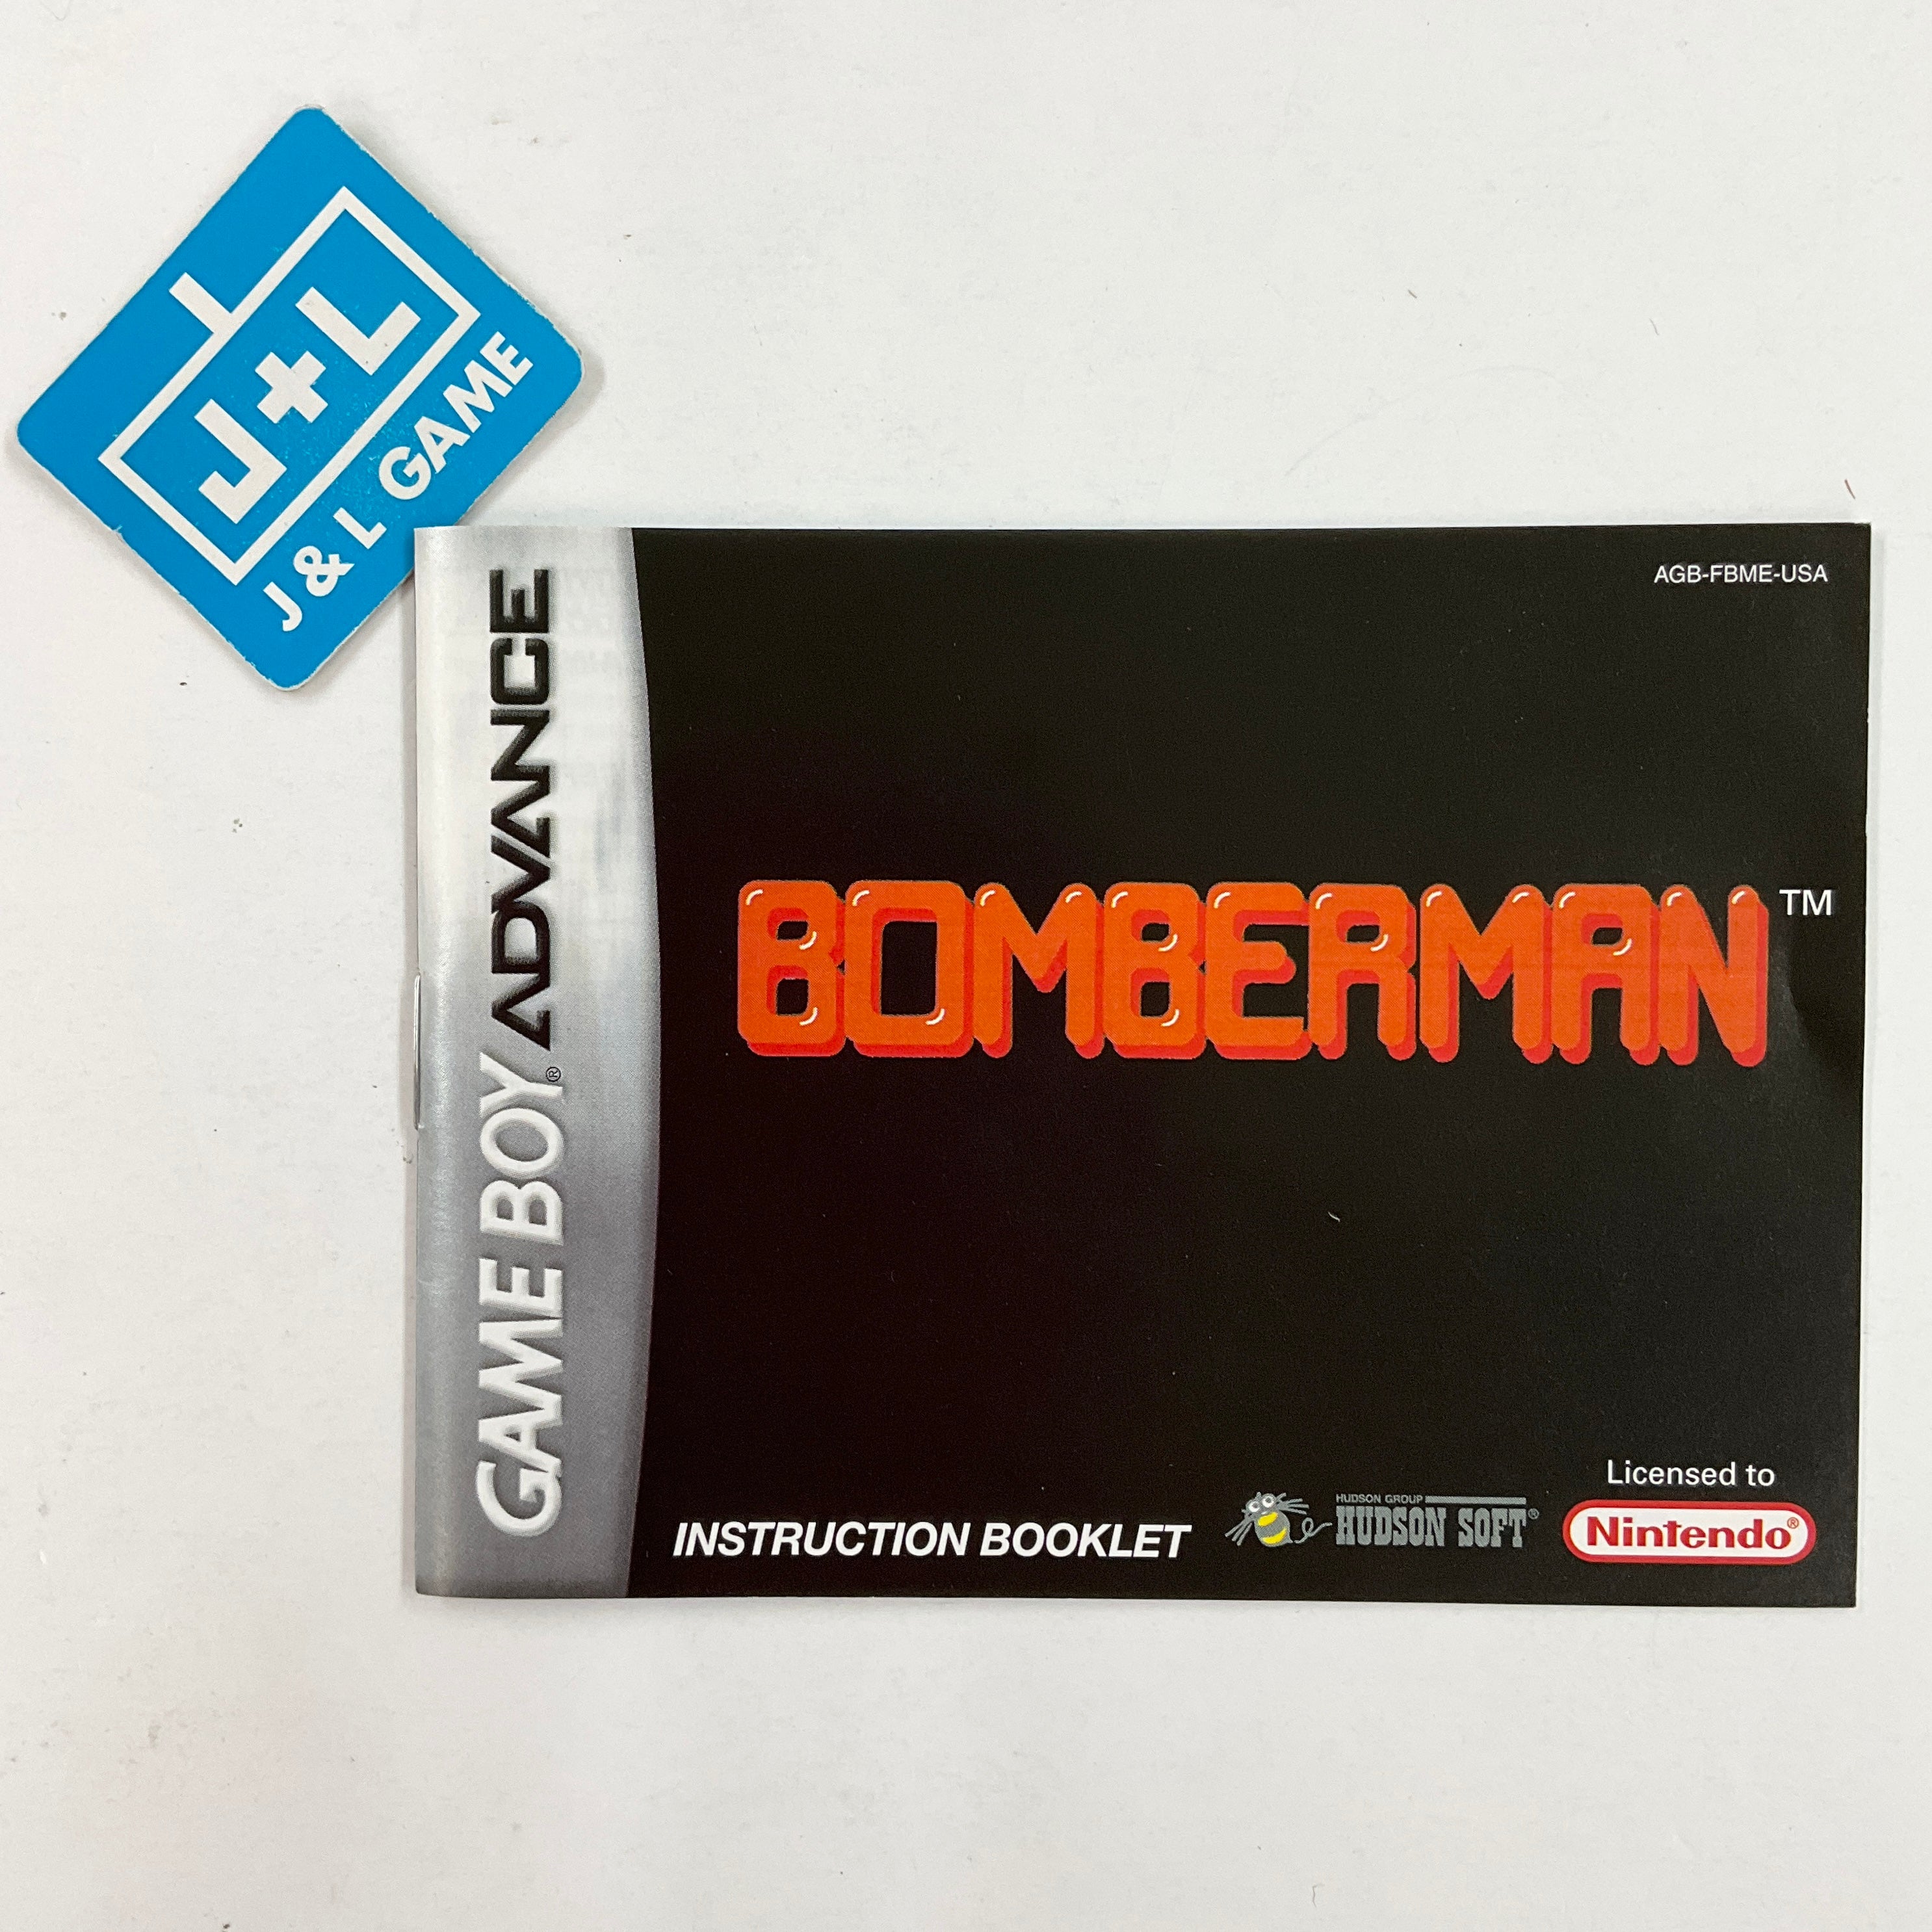 Classic NES Series: Bomberman - (GBA) Game Boy Advance [Pre-Owned] Video Games Nintendo   